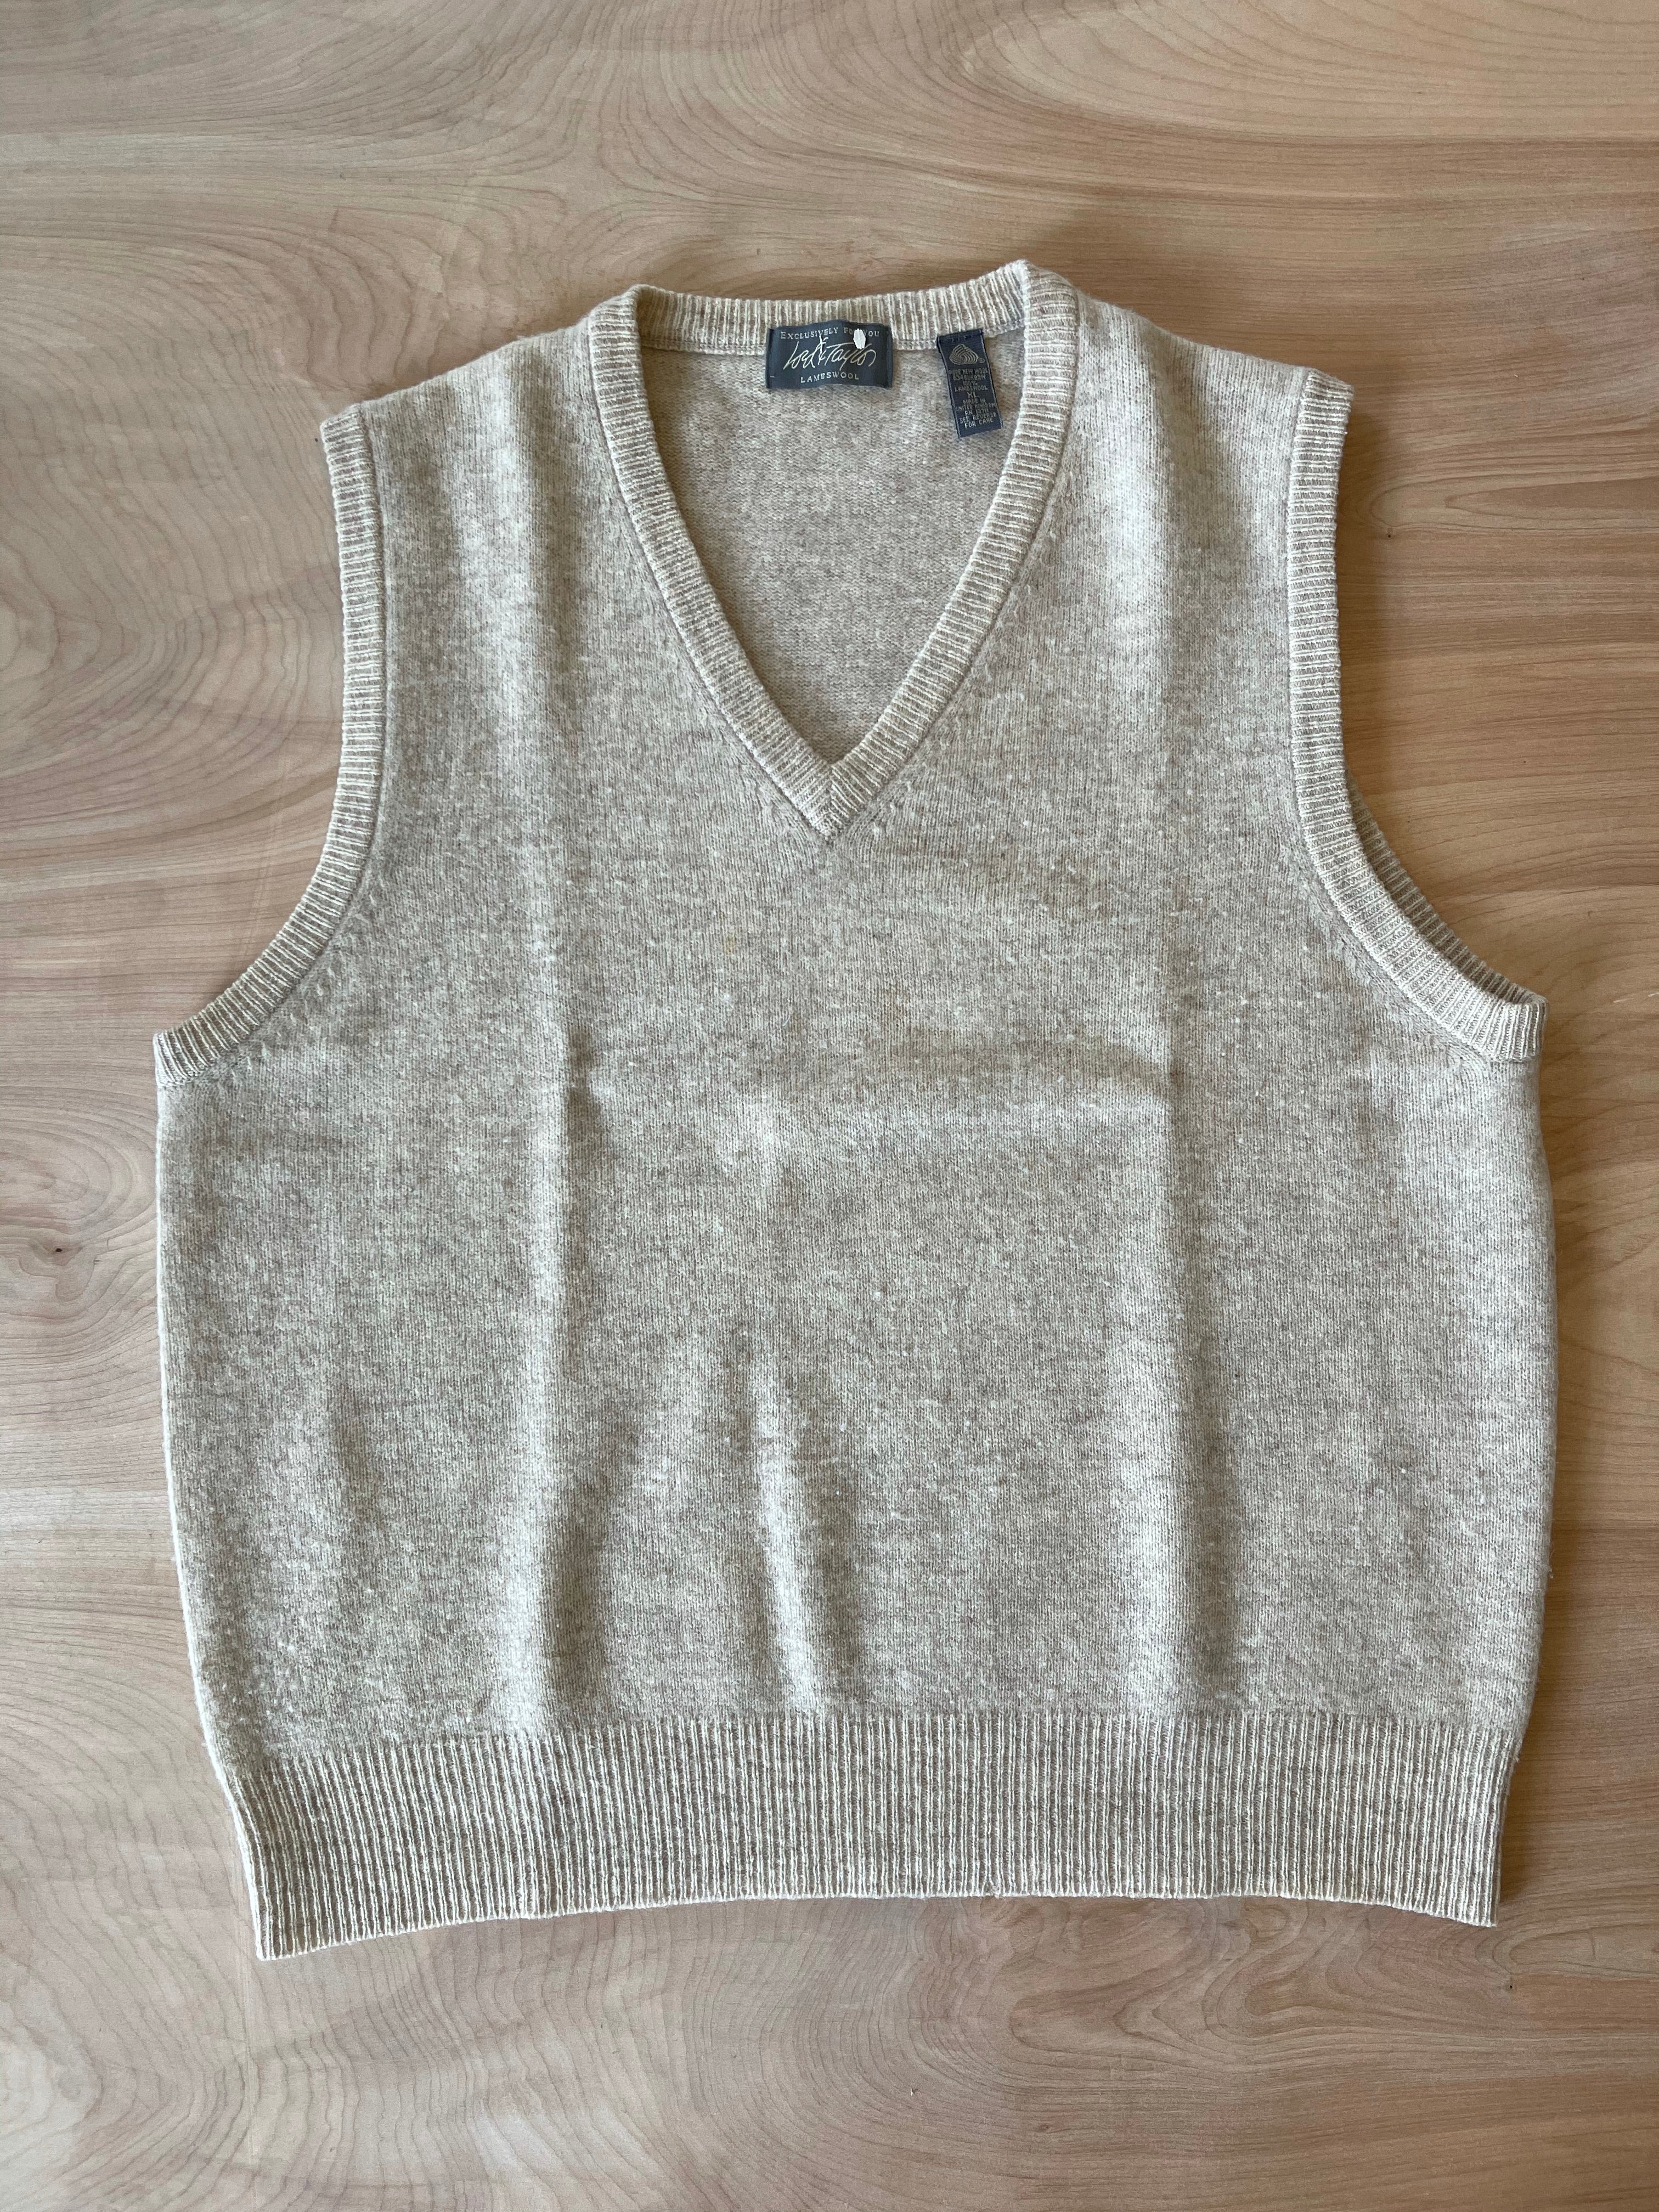 Just That Simple Sweater Vest